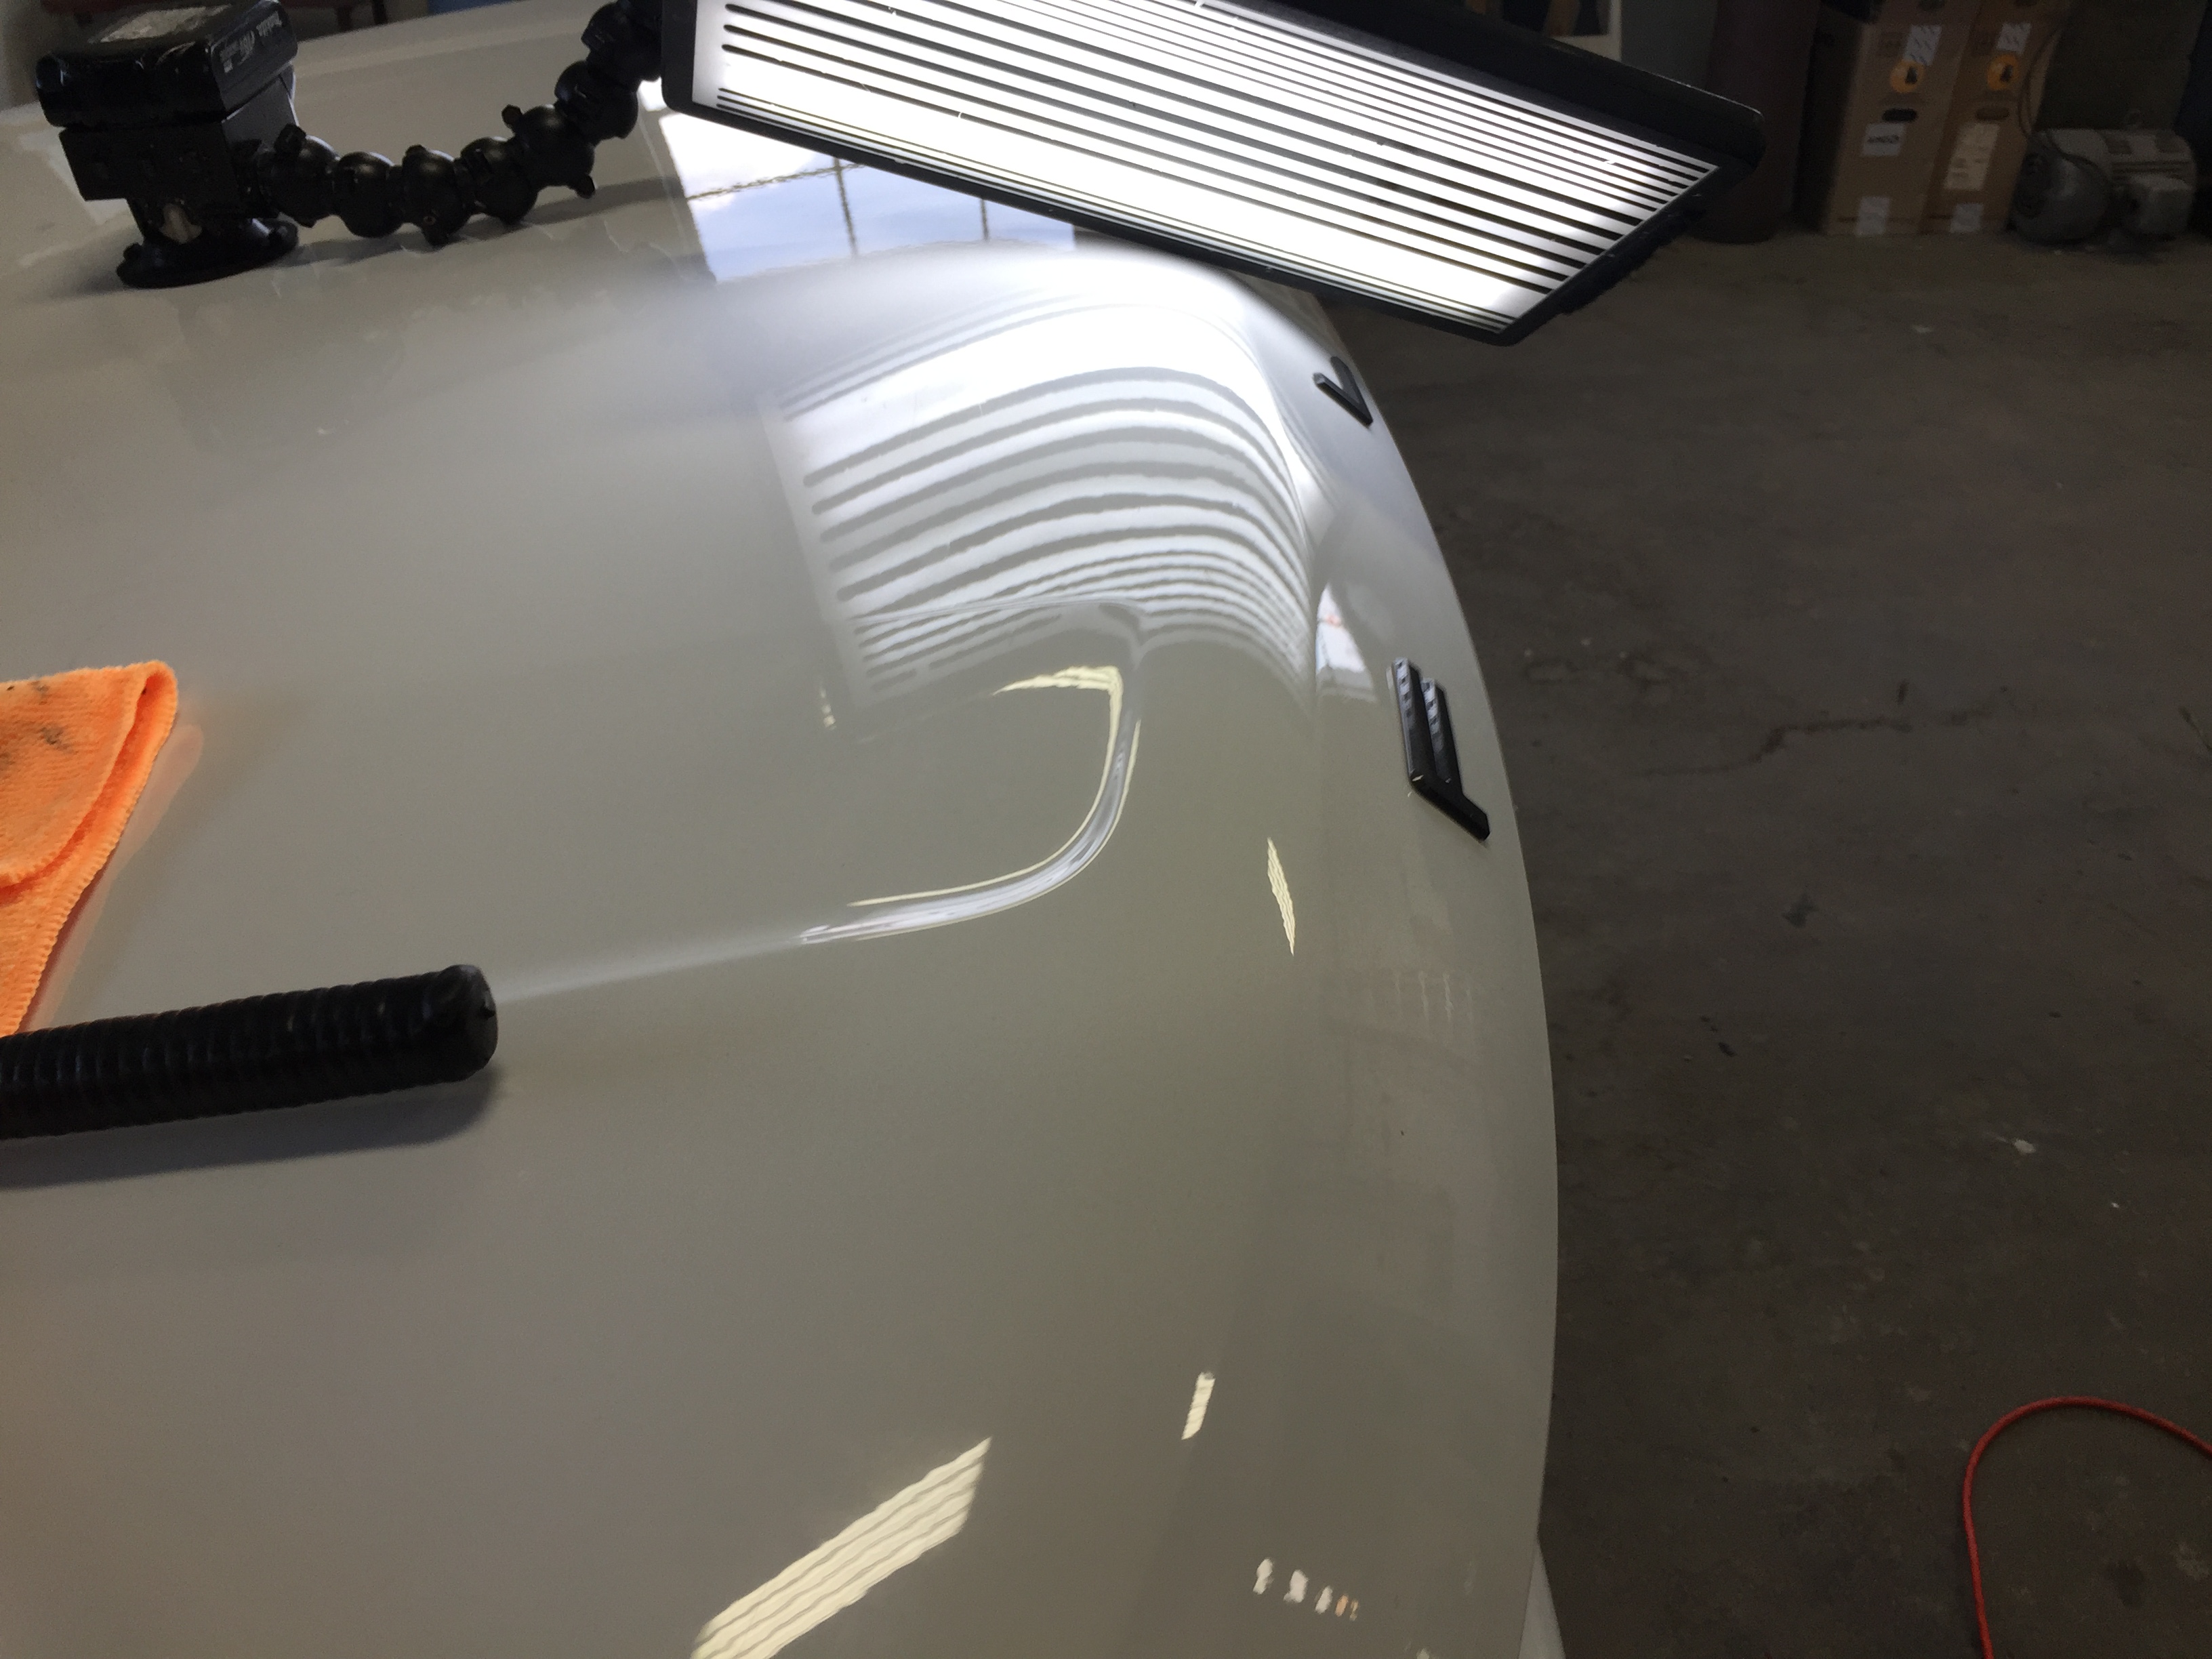 2015 Ford Flex, Paintless Dent Removal, Hood Damage, Springfield, IL. http://217dent.com